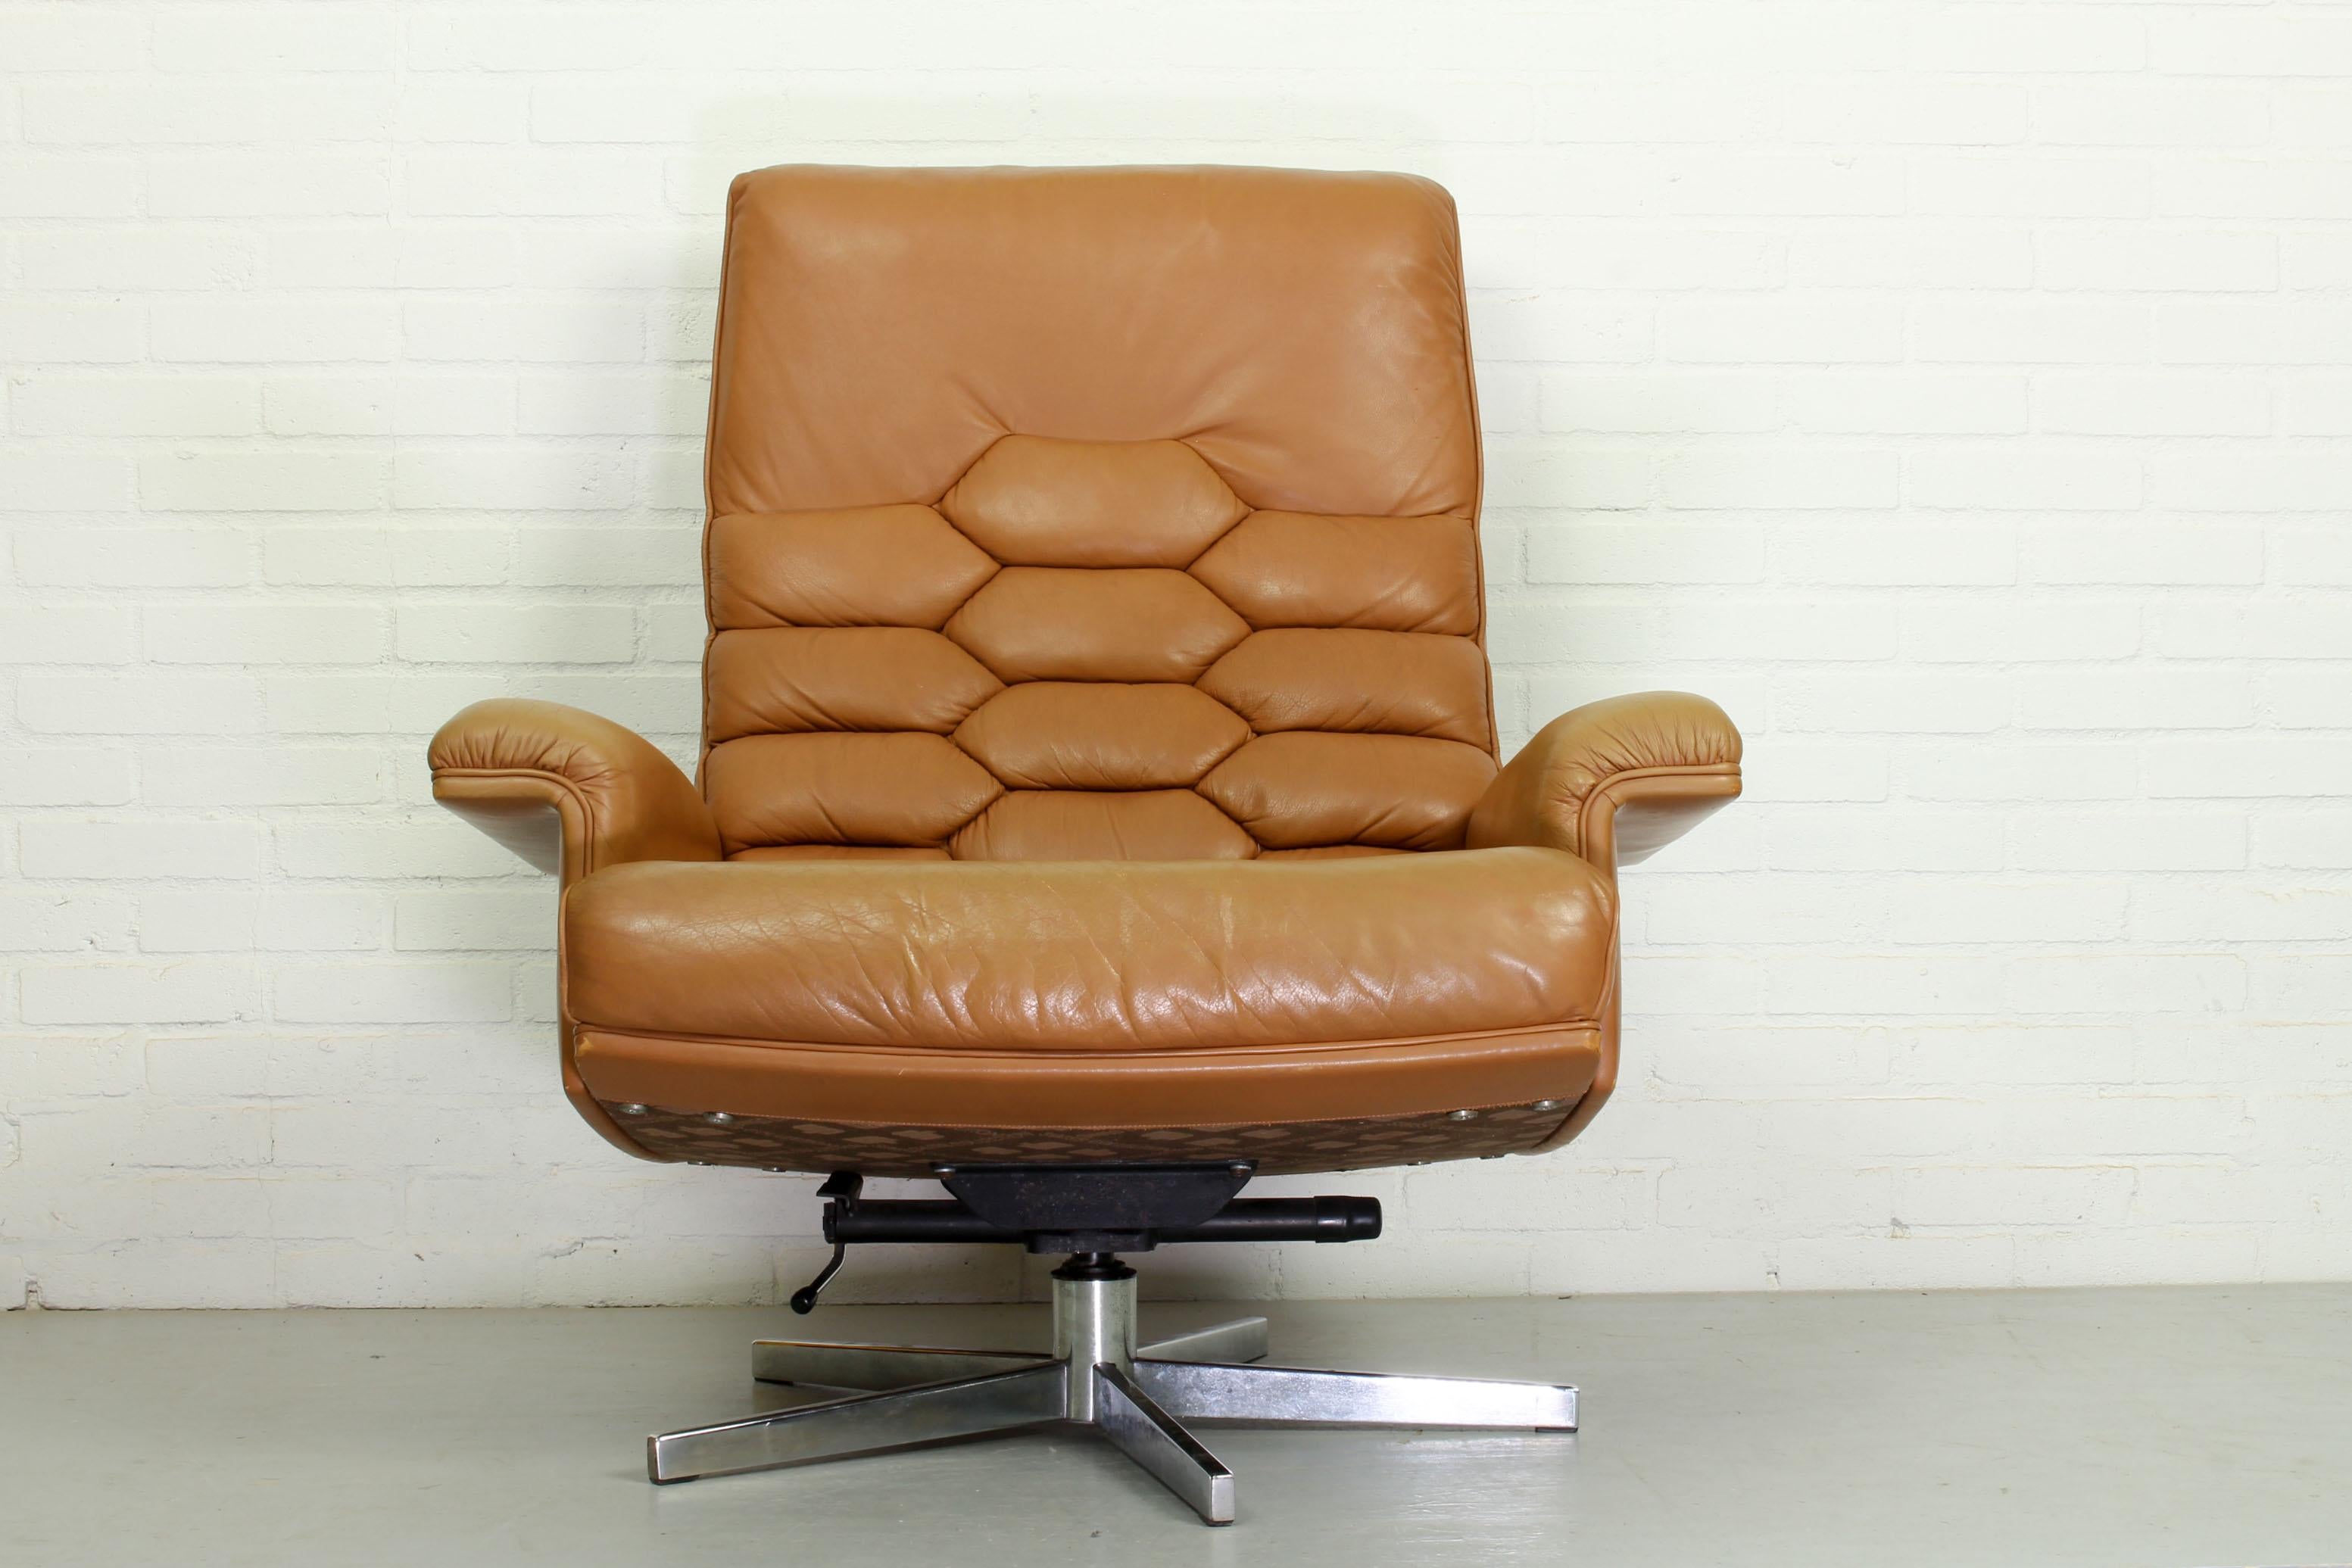 One of the most beautiful designs of Robert Haussmann for De Sede (Switzerland) is surely this DS 35 lounge chair. With its original foam and down filled cognac leather seat and backrest this is one of the most comfortable lounge chair of the 1970s!